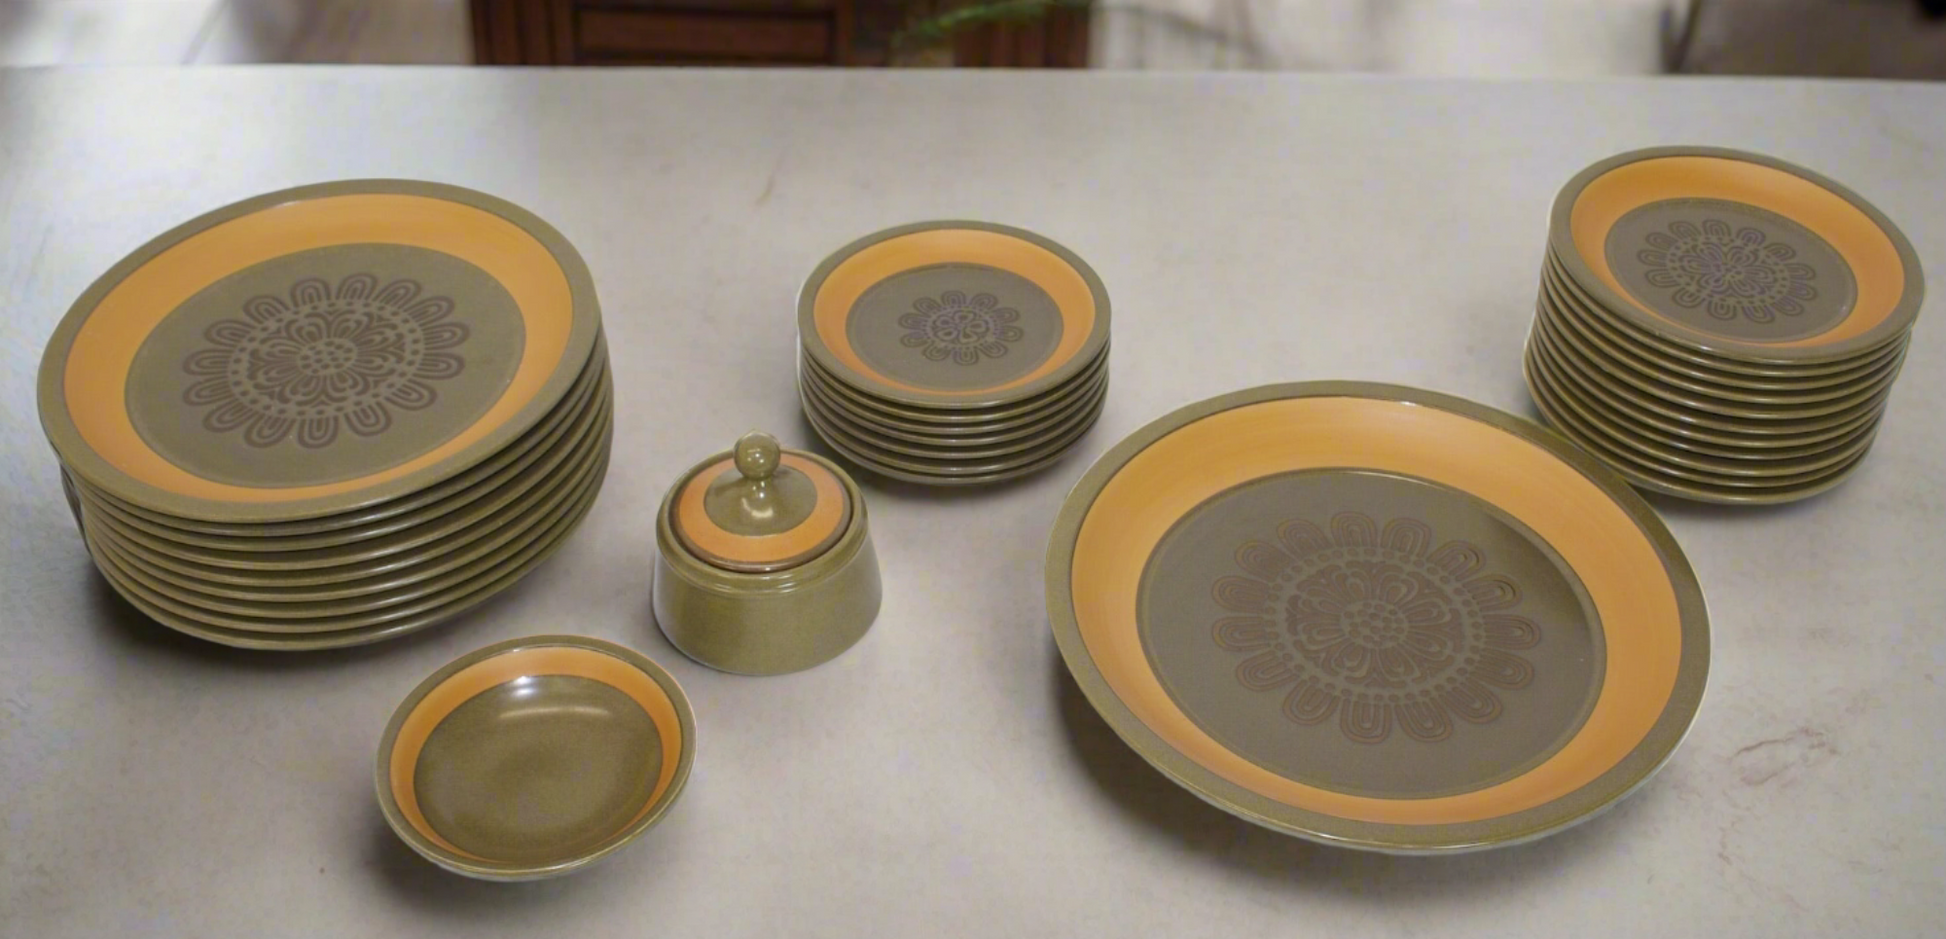 31 pc Stoneware Plates with a sunflower design